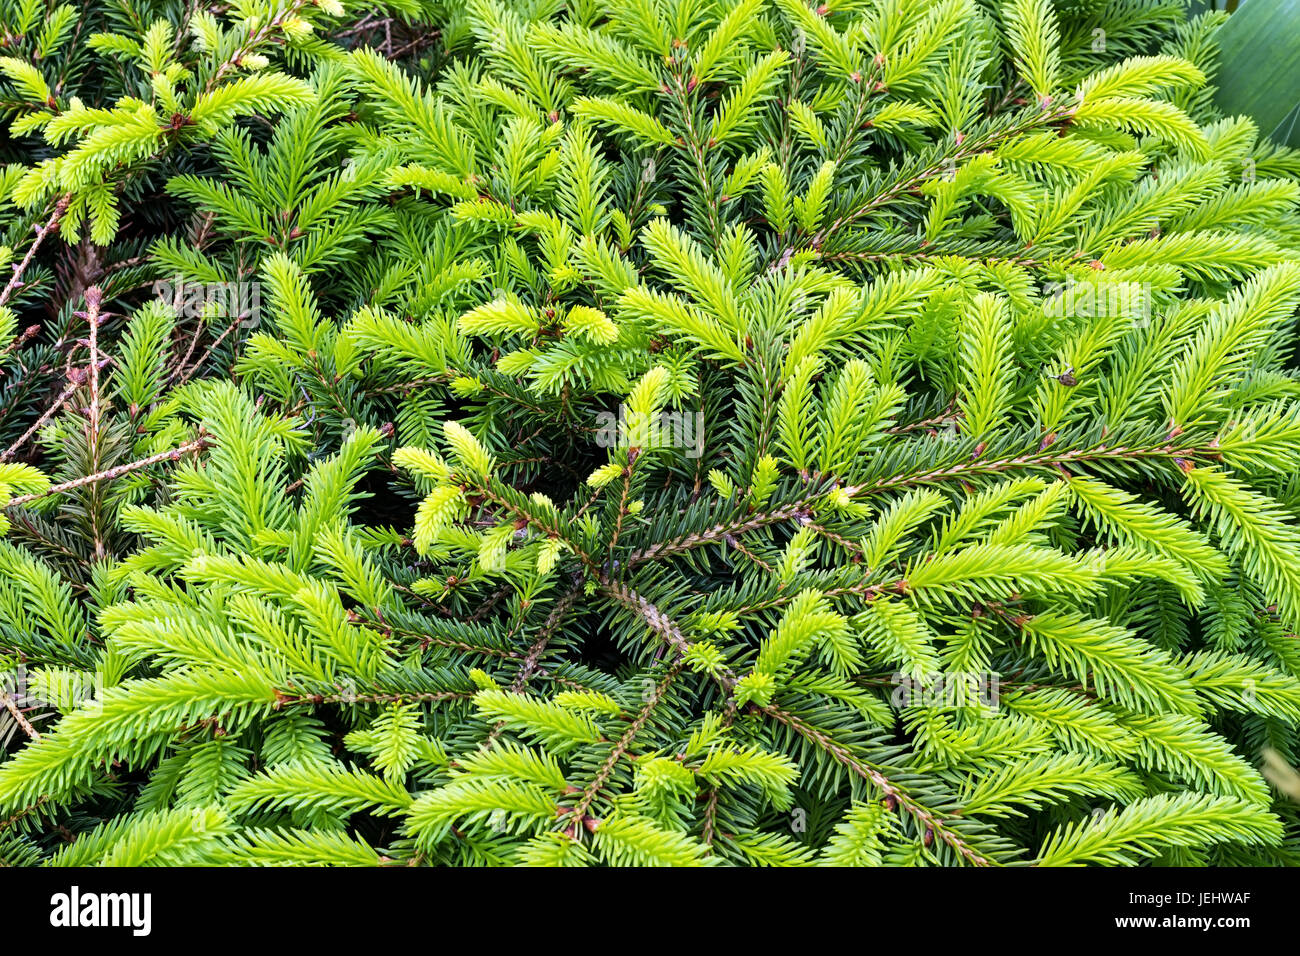 Young shoots of coniferous trees Stock Photo